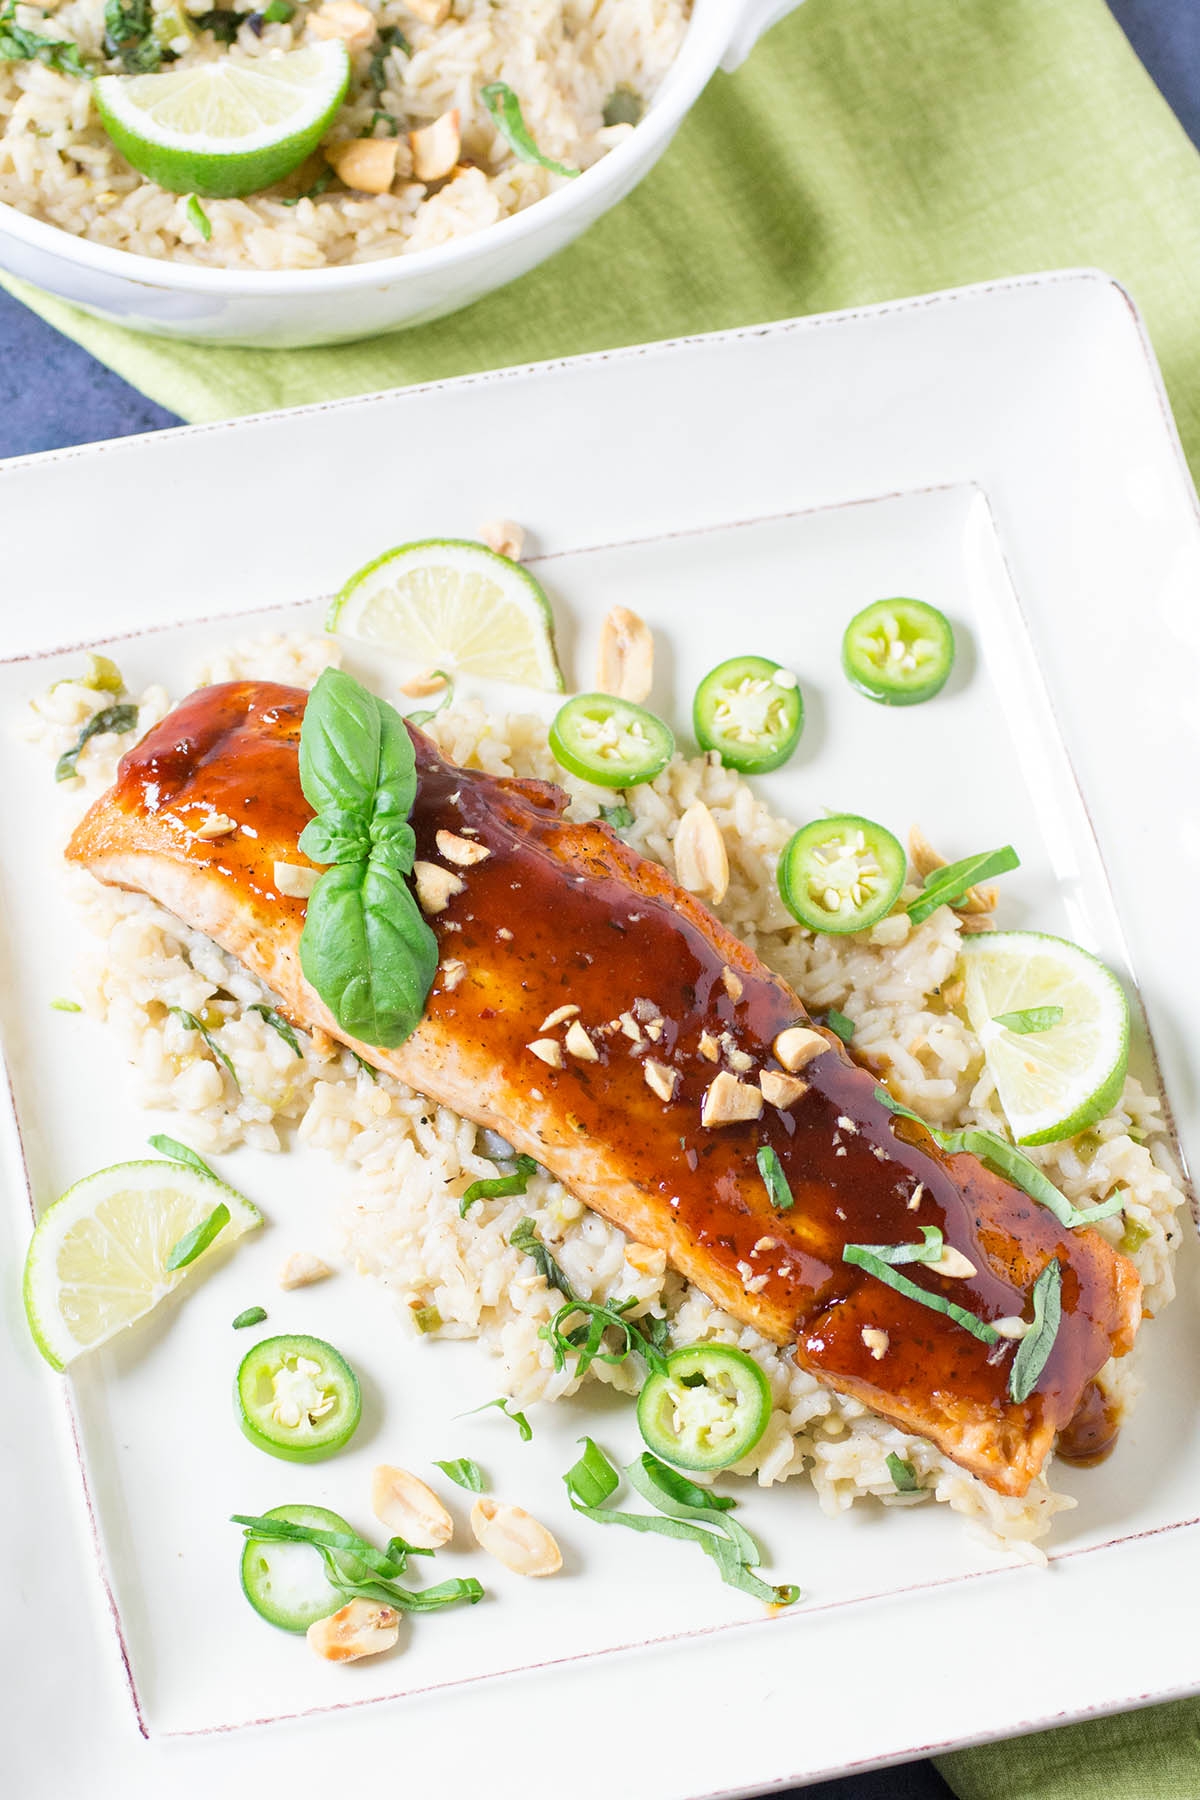 Szechuan Salmon With Chili-Basil Rice ready and served